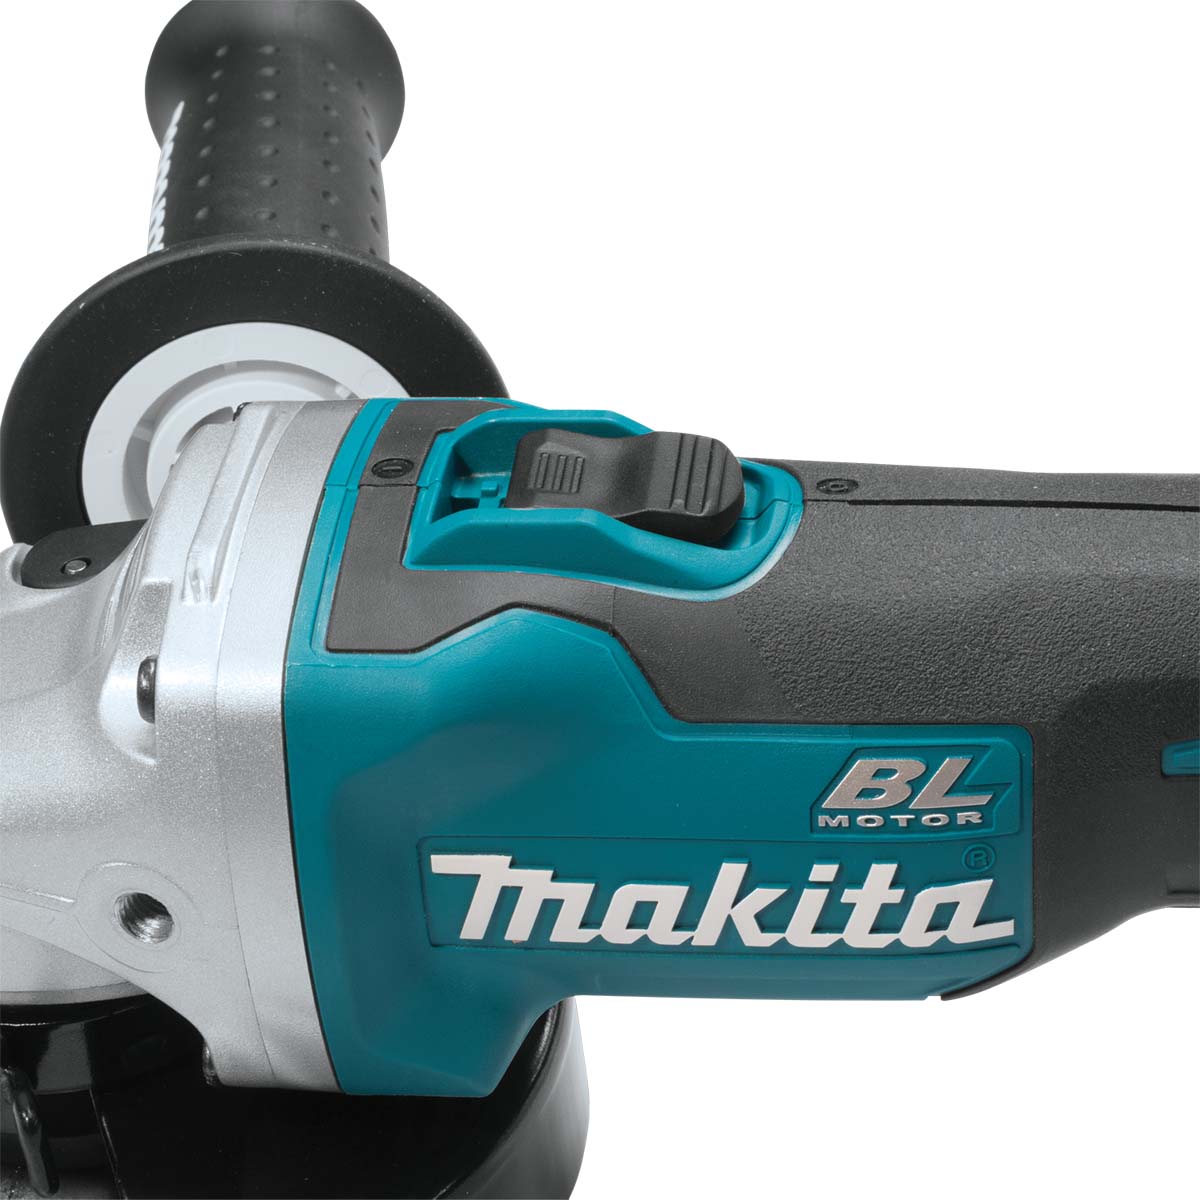 18V 125mm Brushless Angle Grinder Bare (Tool Only) DGA504Z by Makita